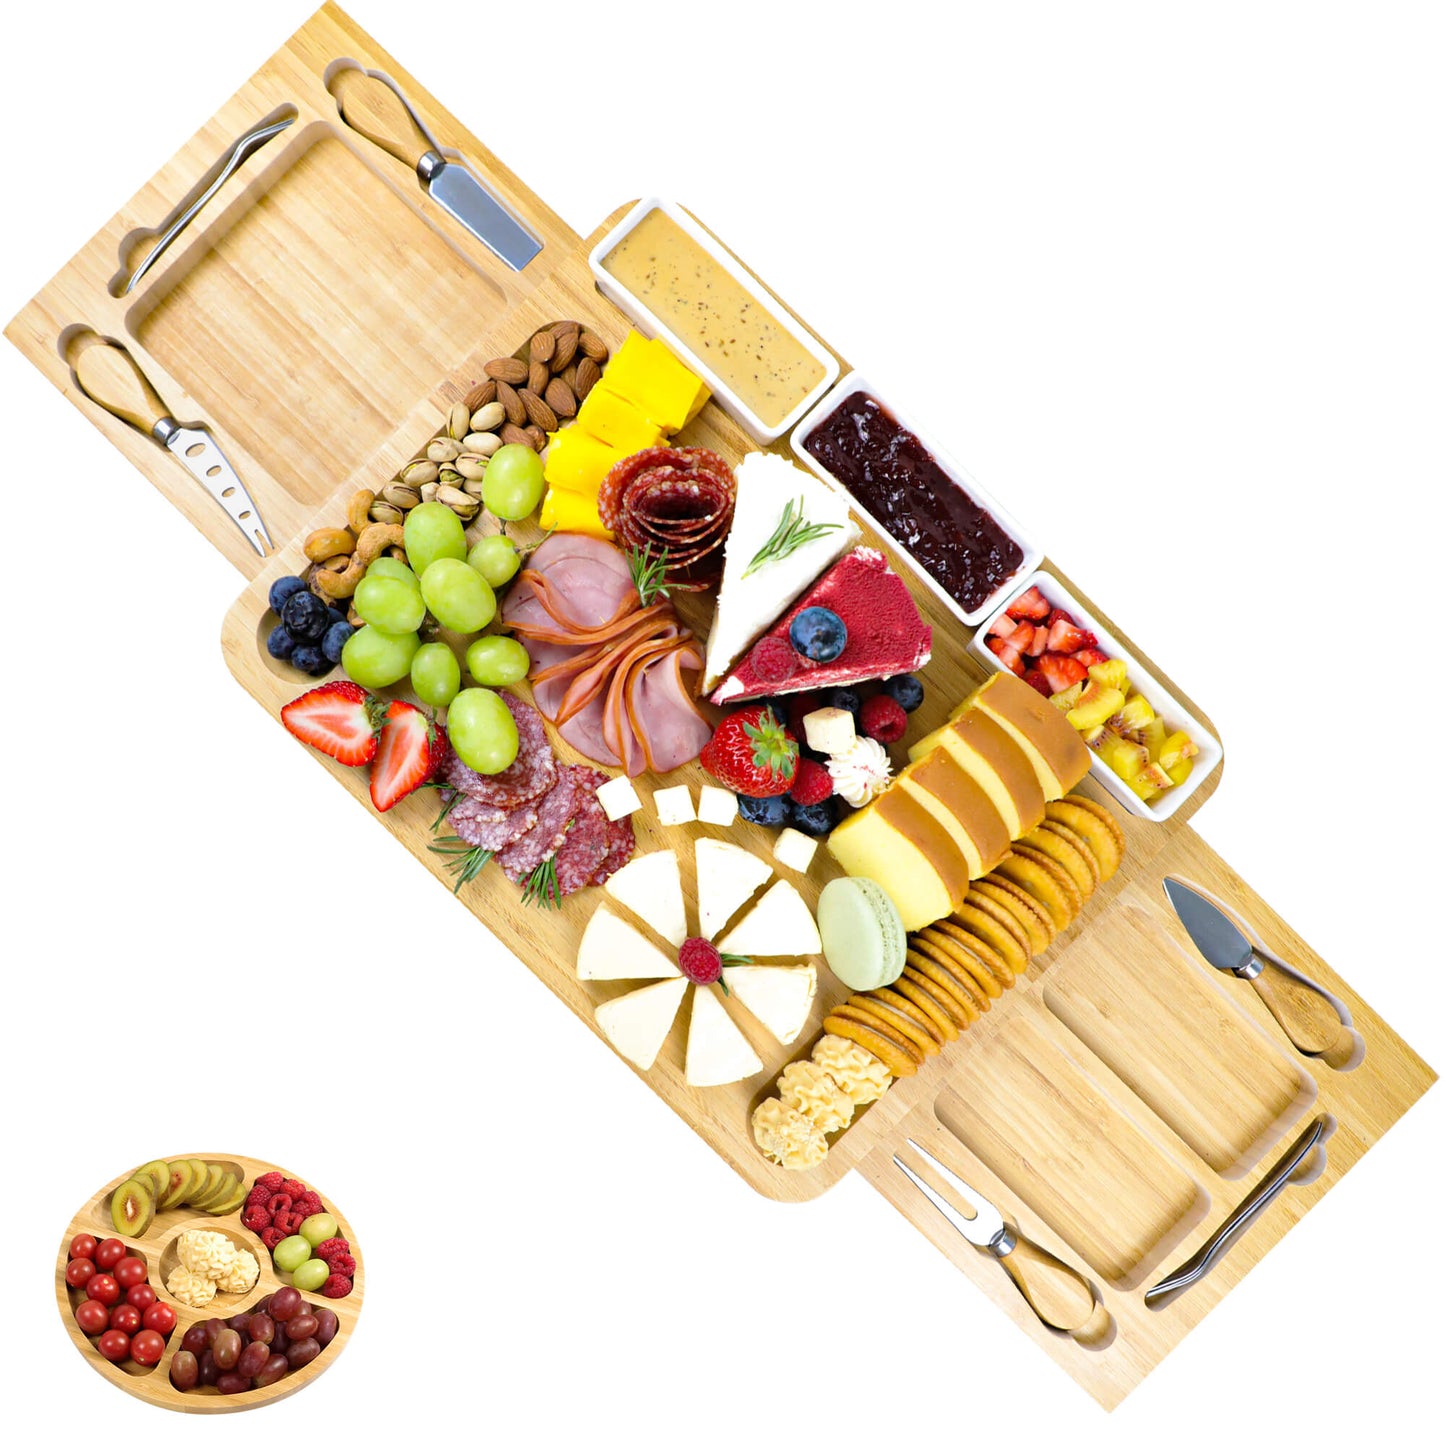 GL-Bamboo Cheese Board Set with Expandable Drawer, Including Fruit Tray